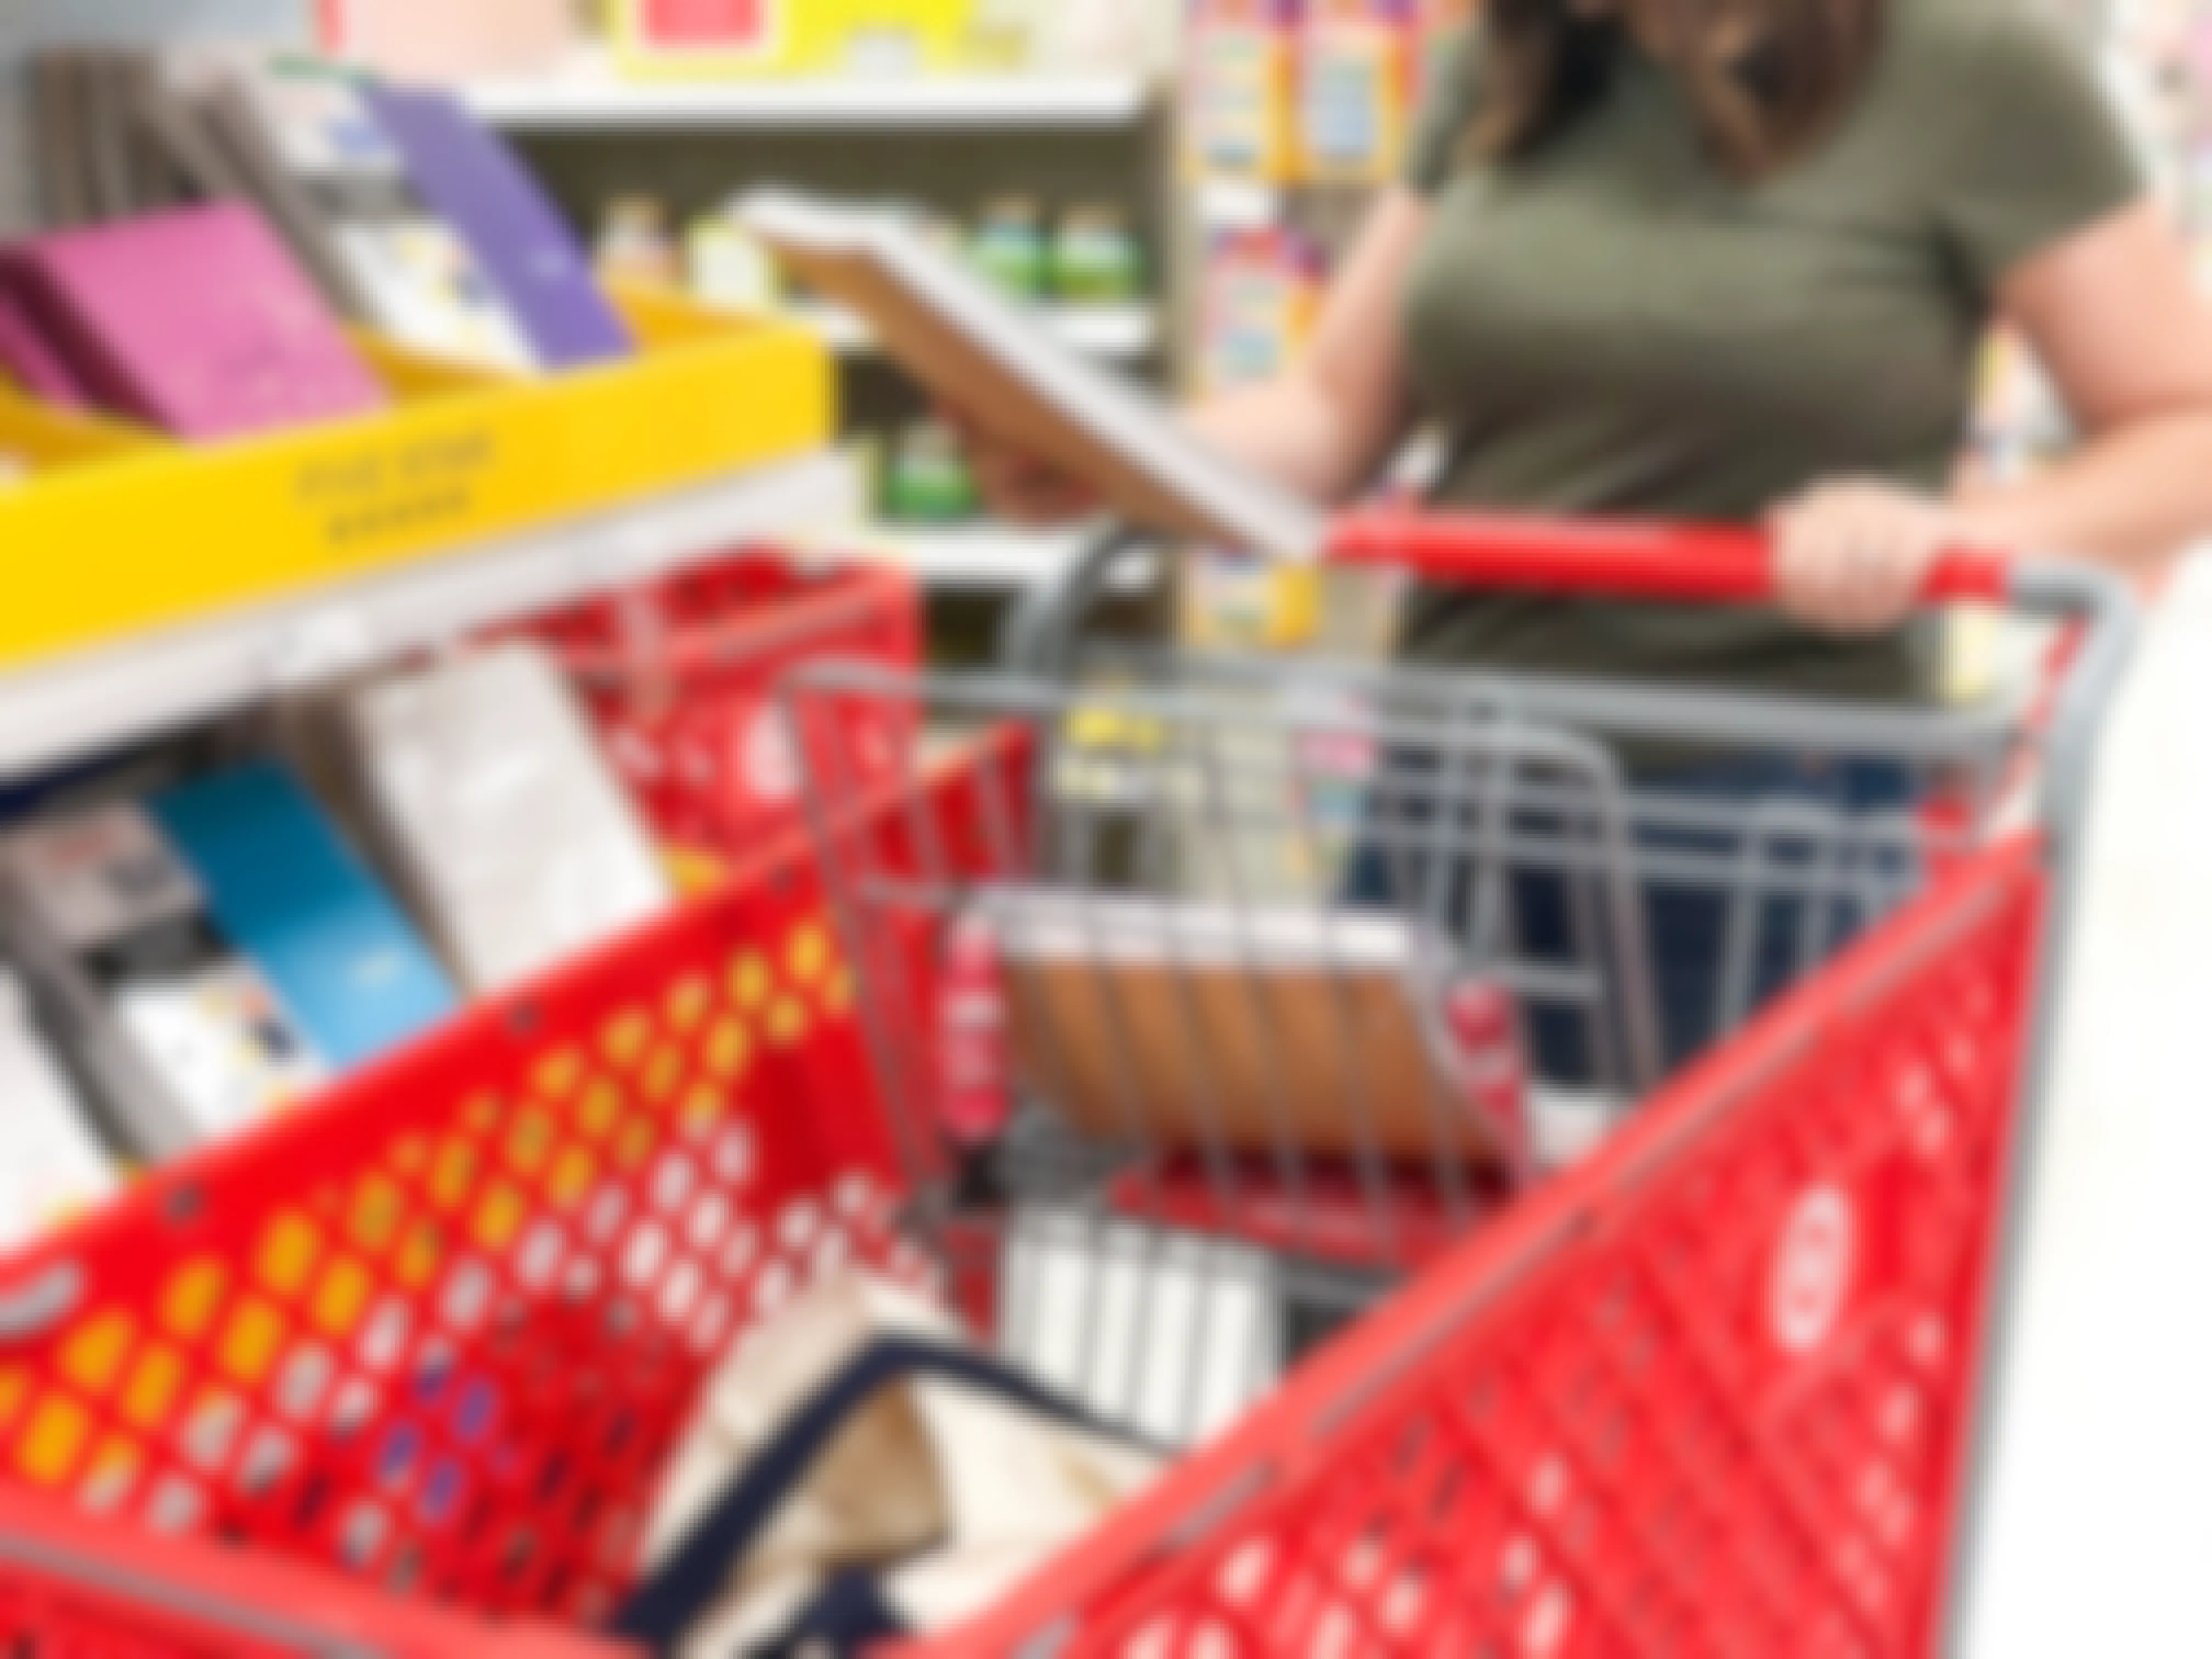 A woman pushing a target shopping cart and holding a five star notebook in her hand